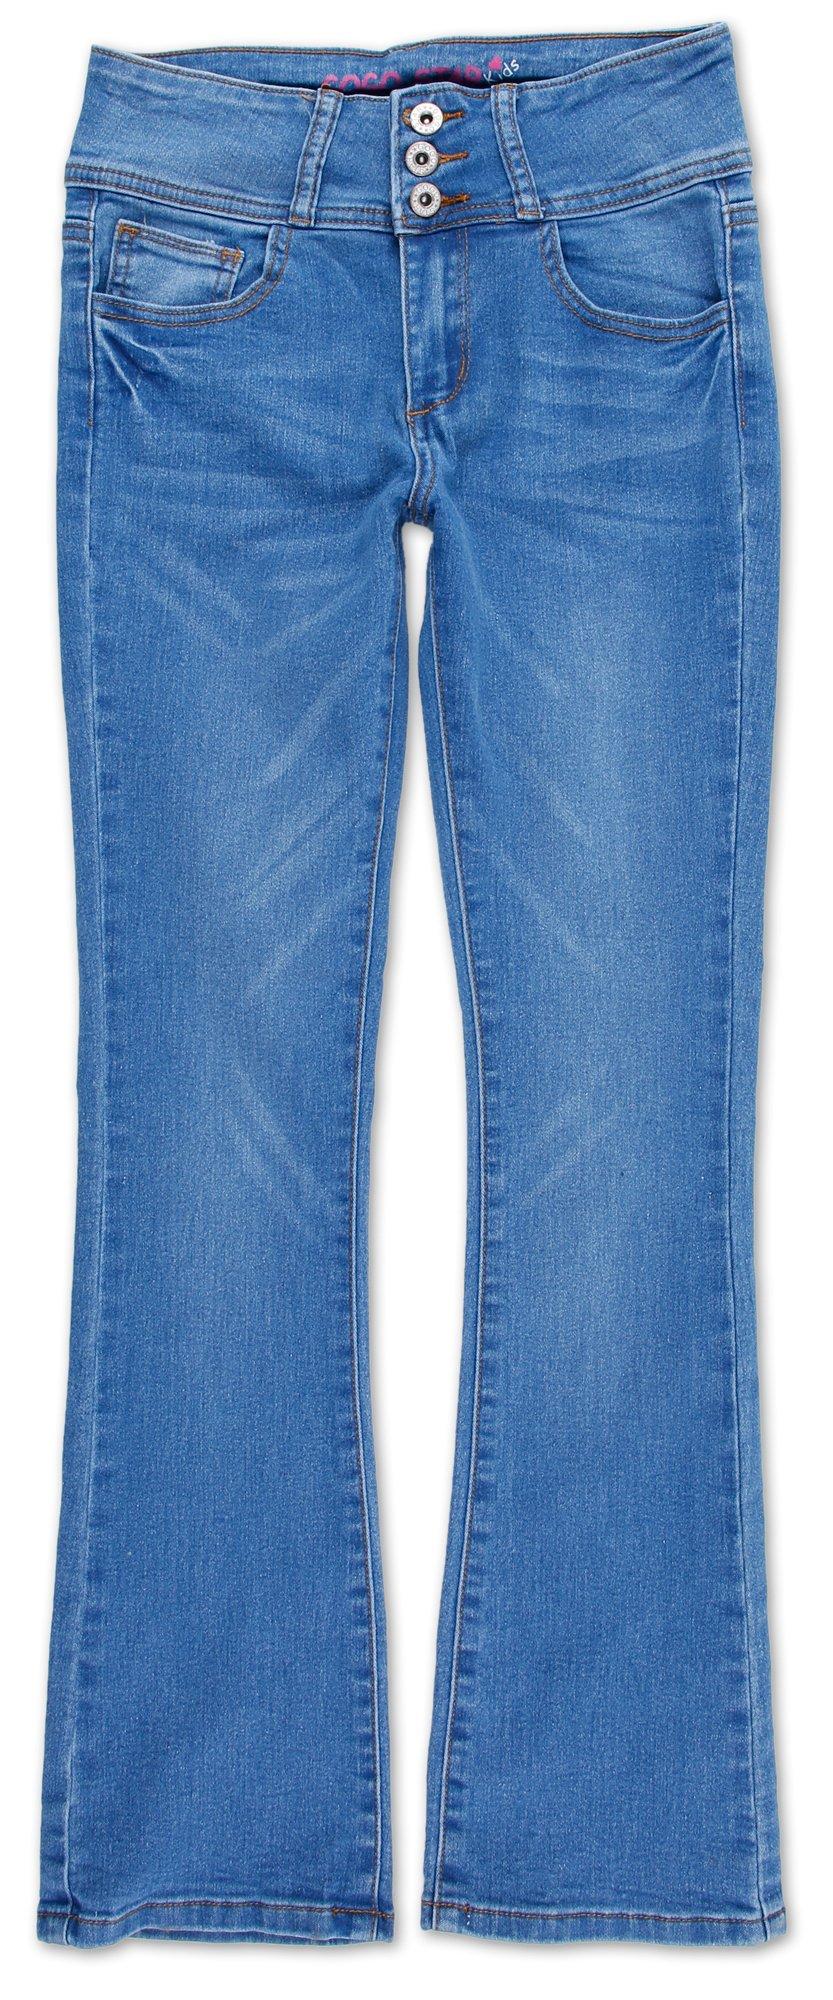 Girls High Waisted Flare Jeans